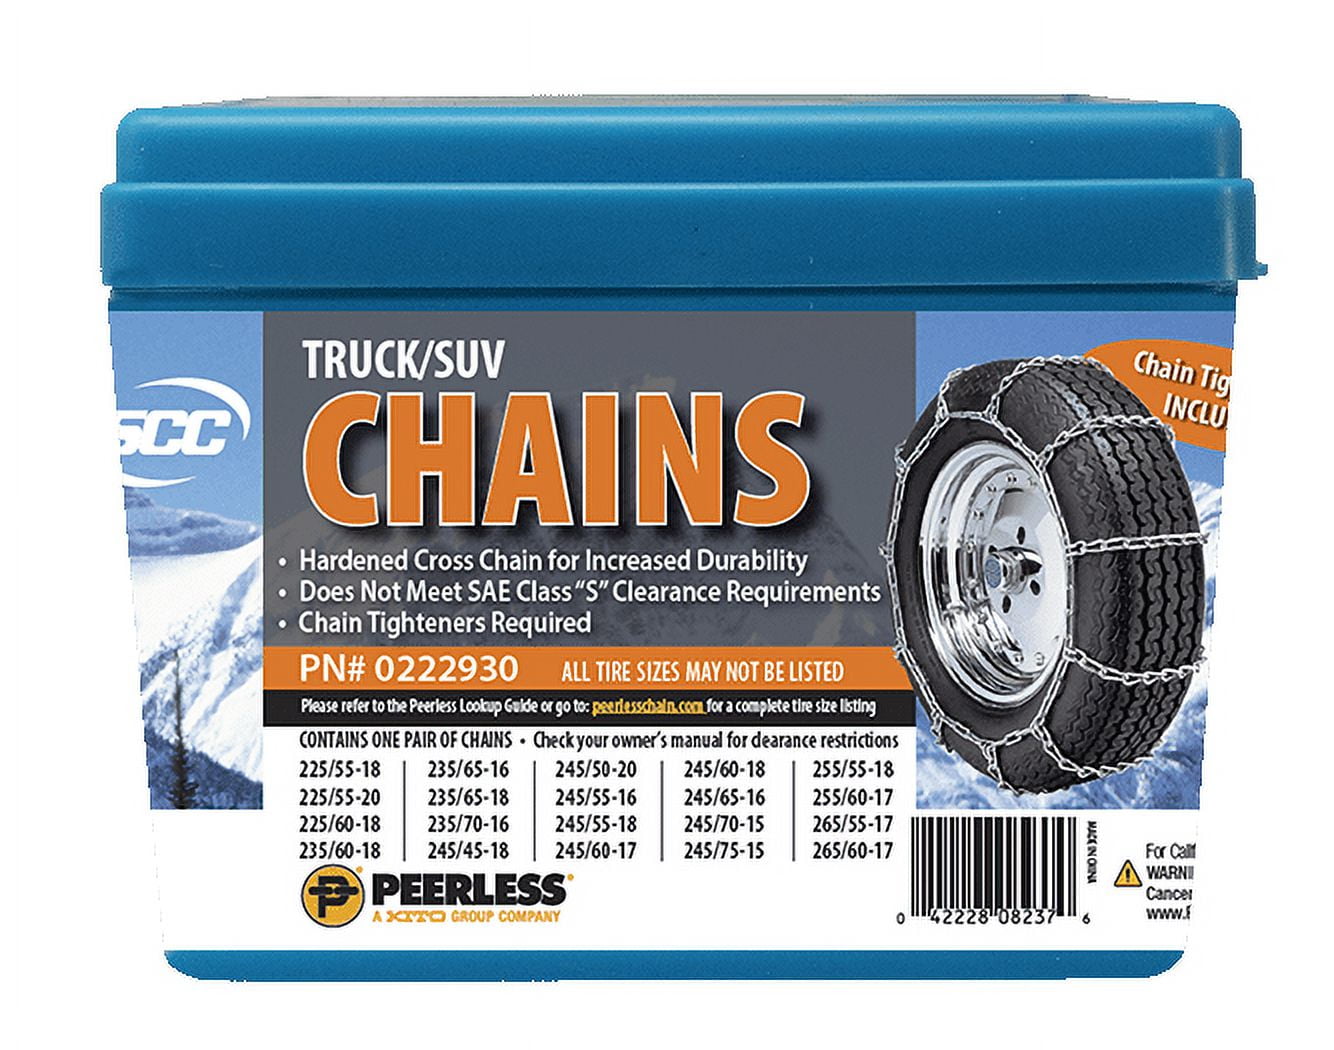 Peerless Chain Truck Tire Chains with Rubber Tighteners, #0222930 